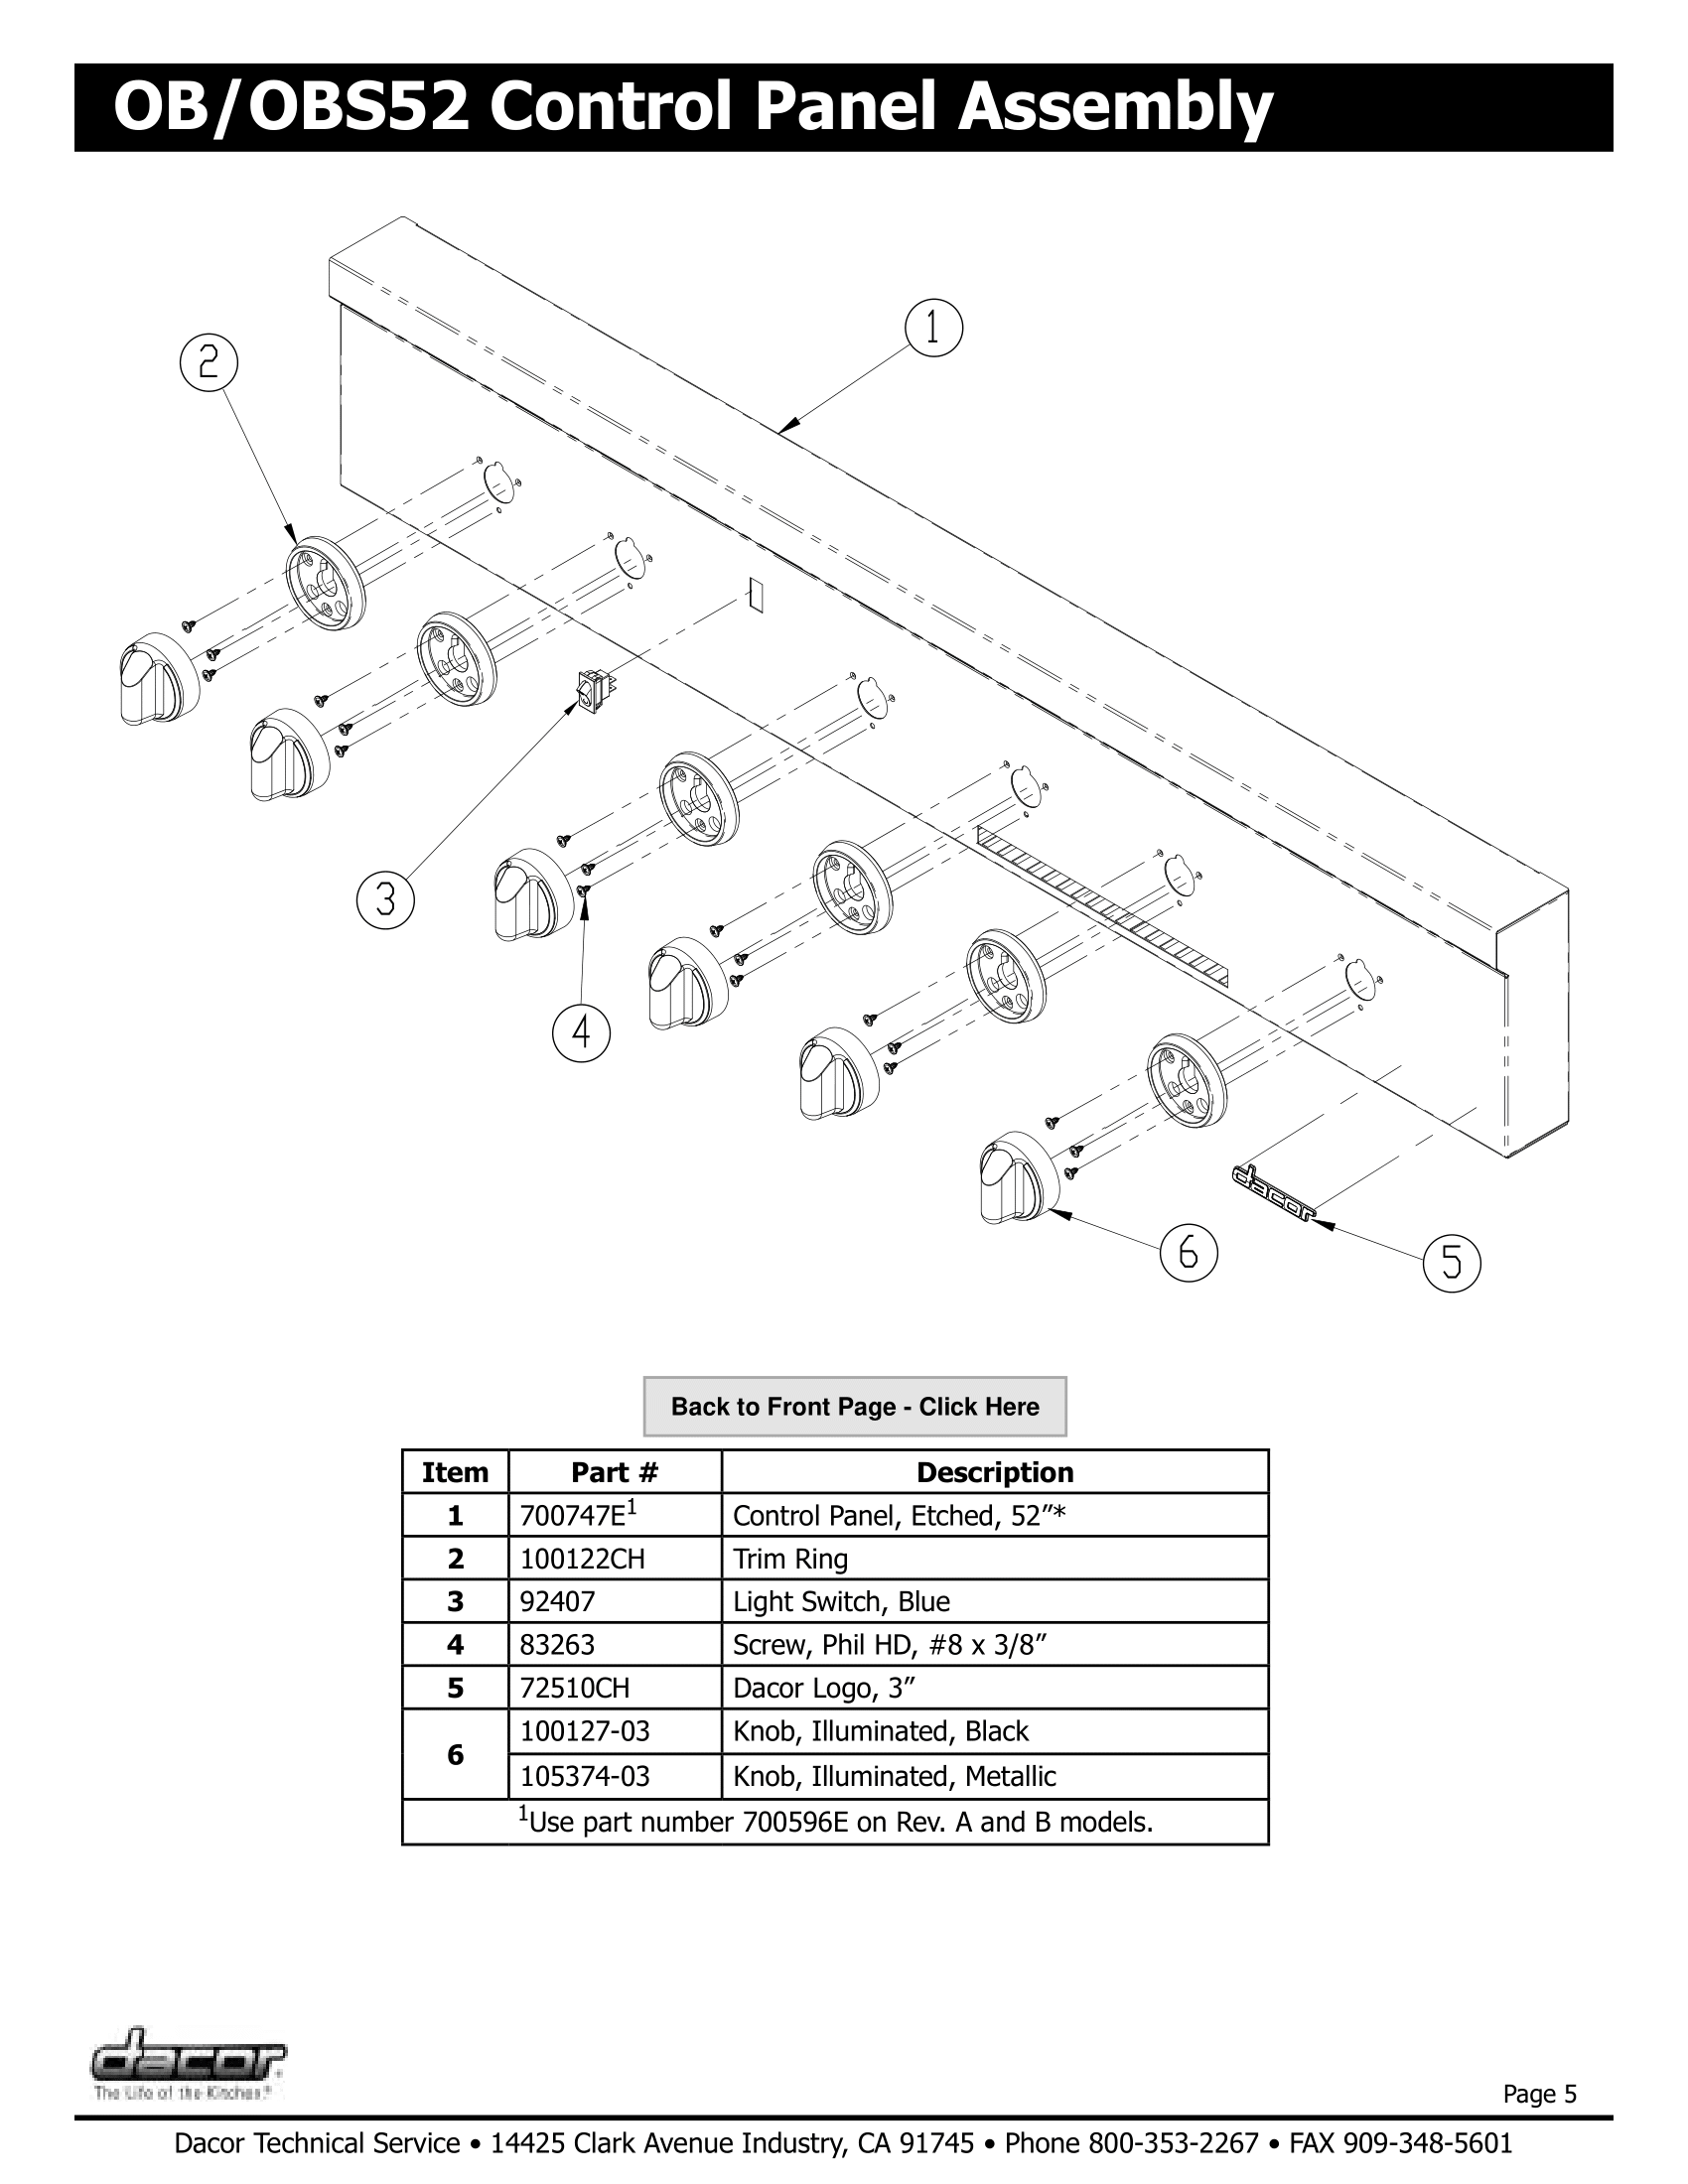 Dacor OB52 Control Panel Assembly Schematic